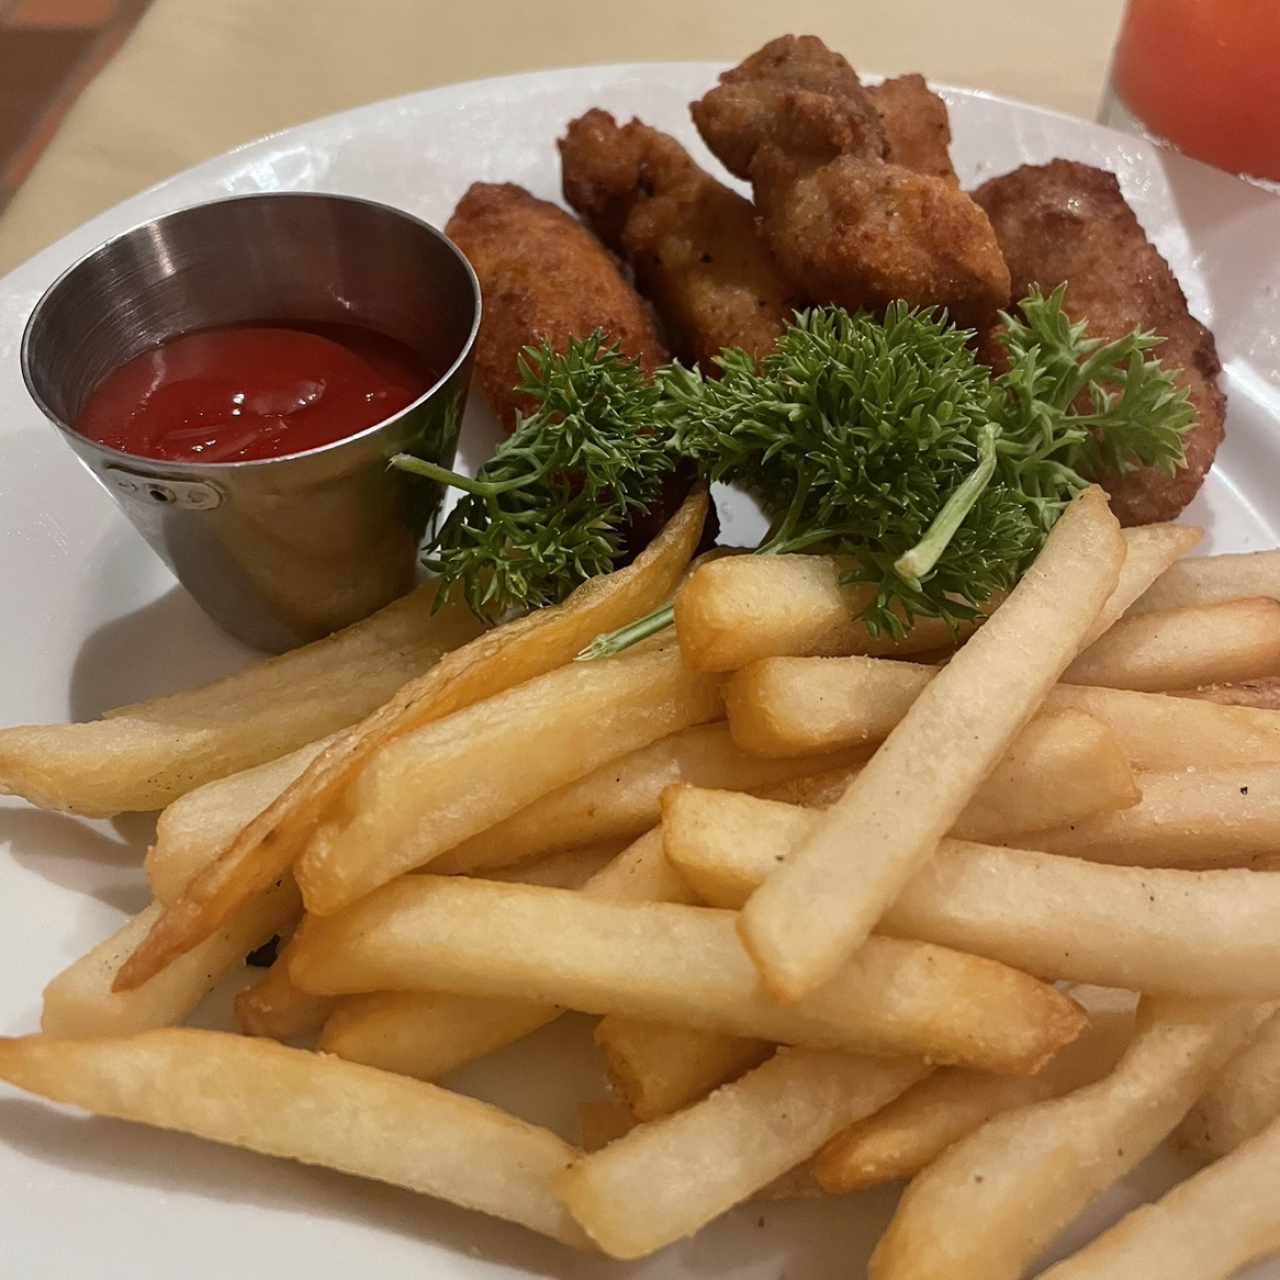 Chicken or fish nuggets with fries